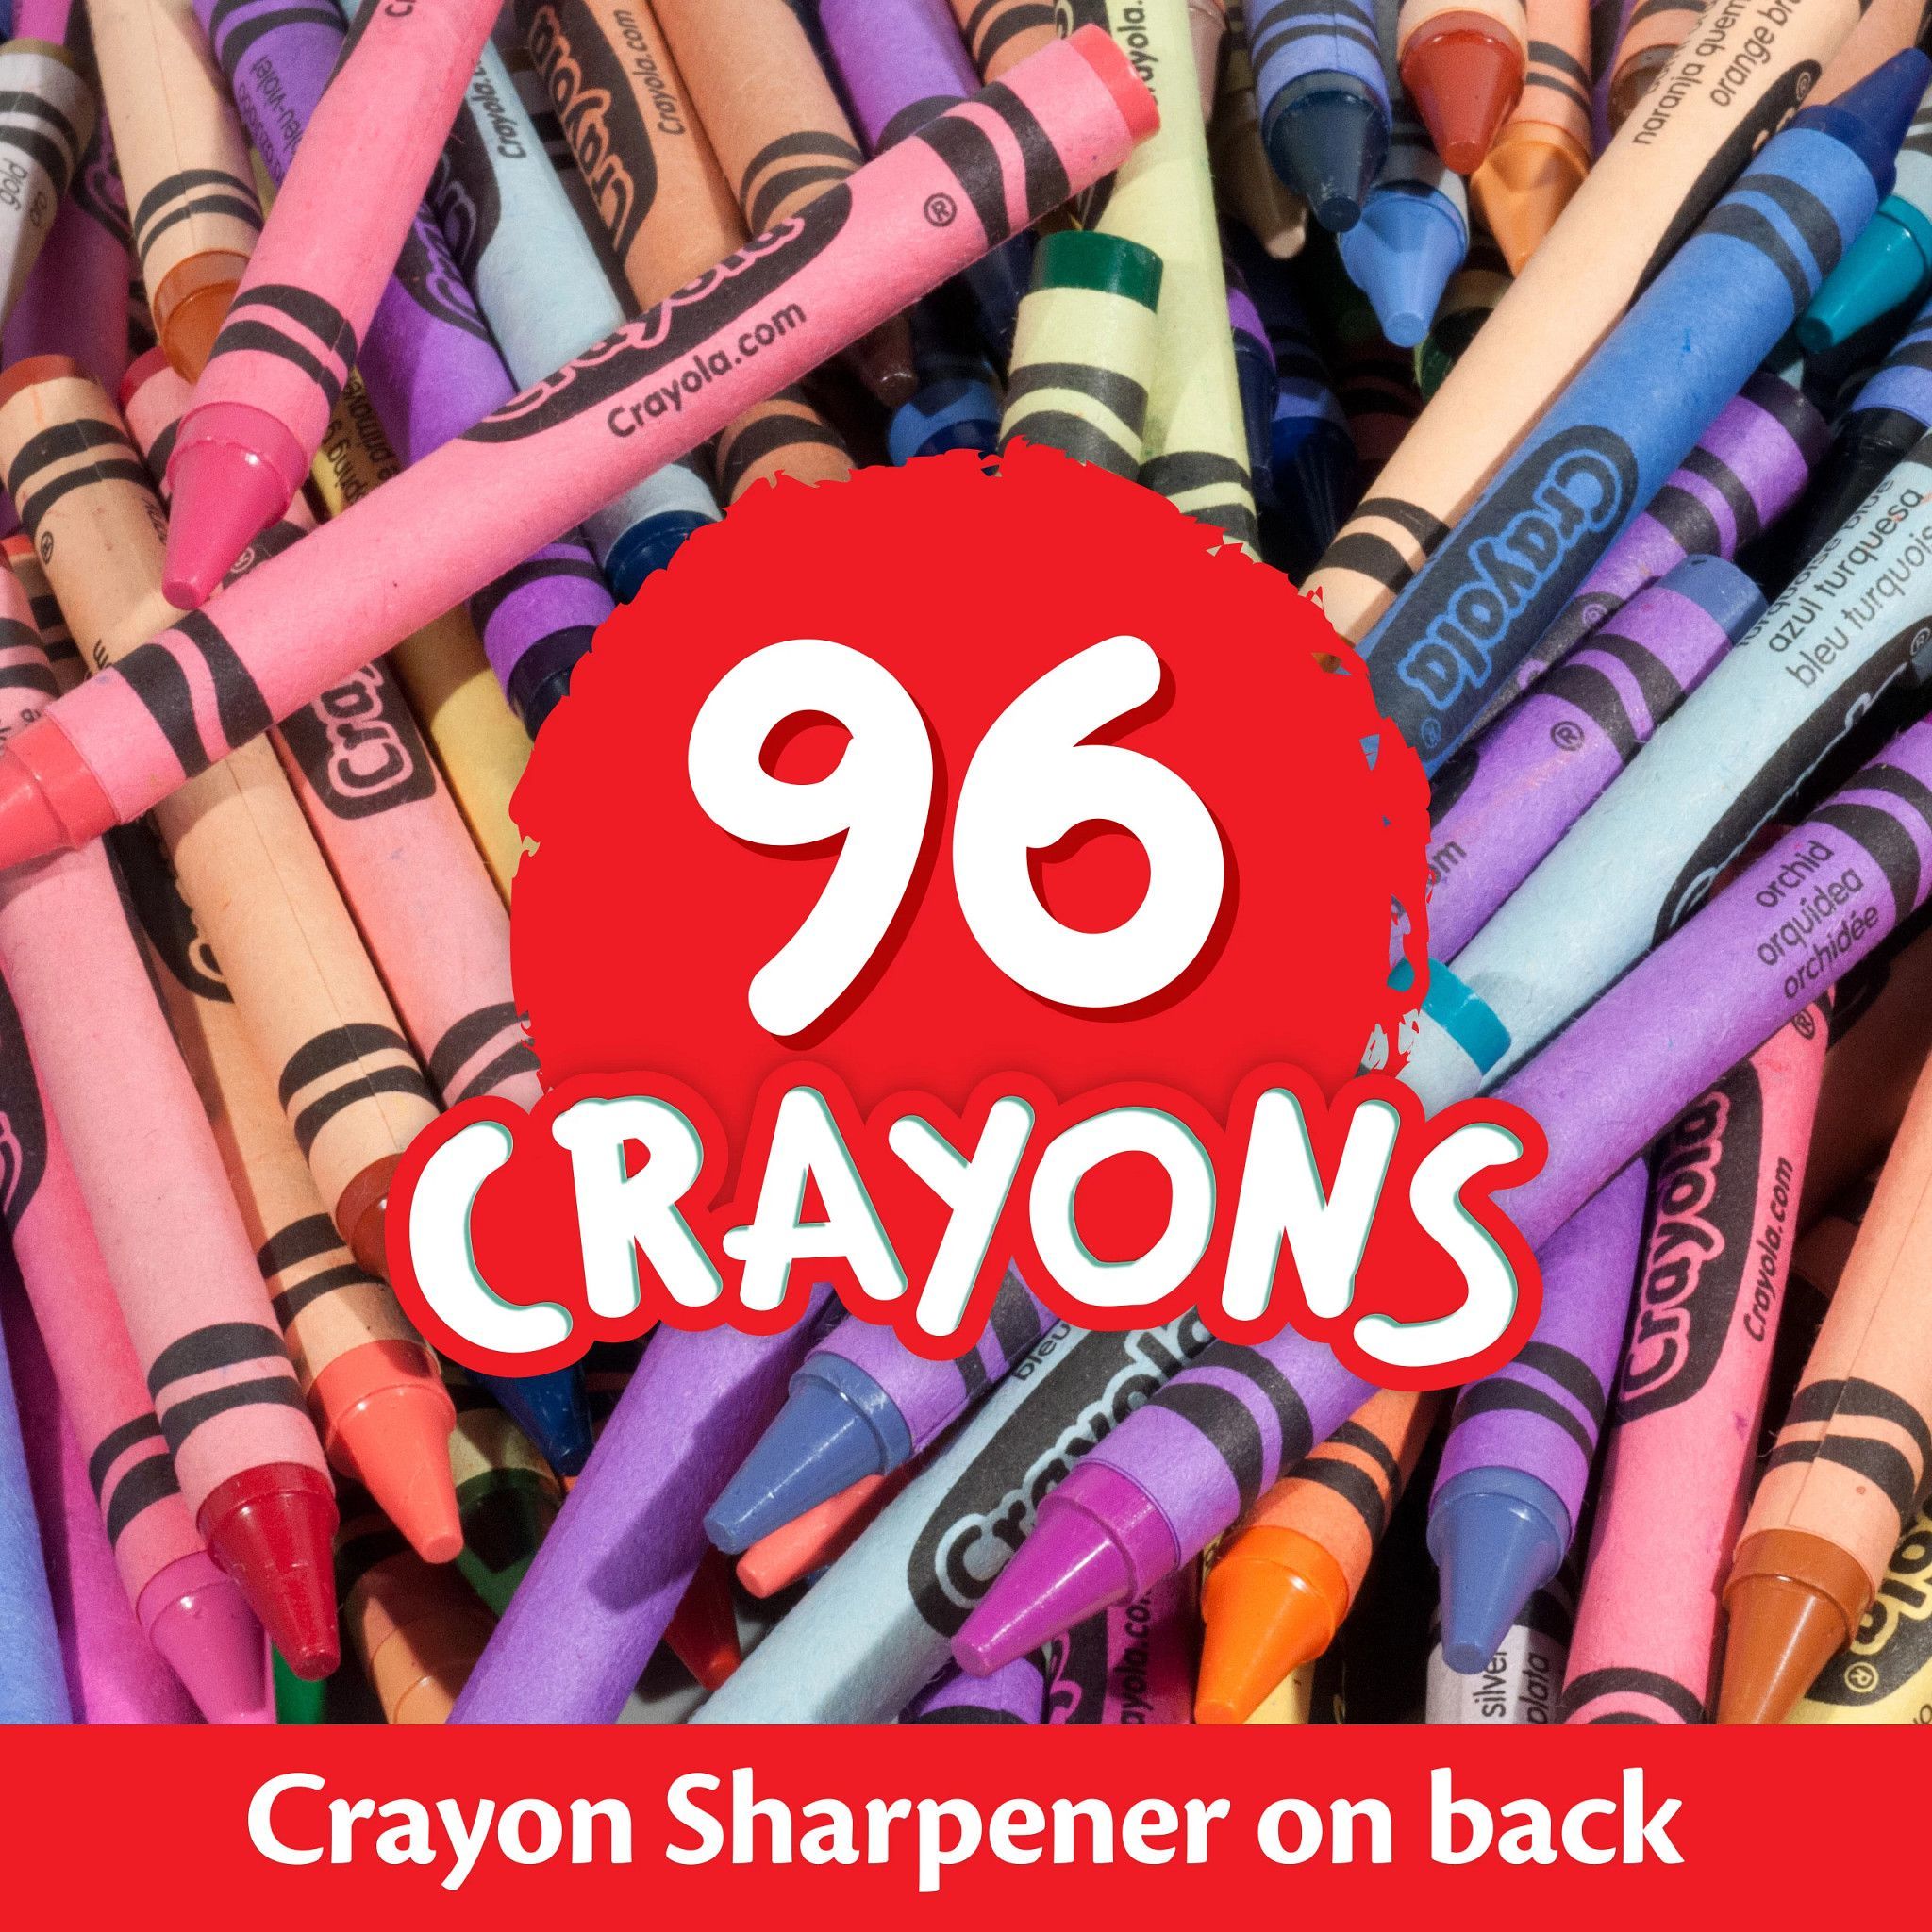 Crayola Crayon Set, 96-Colors, School Supplies, Art Gifts for Kids - image 4 of 12